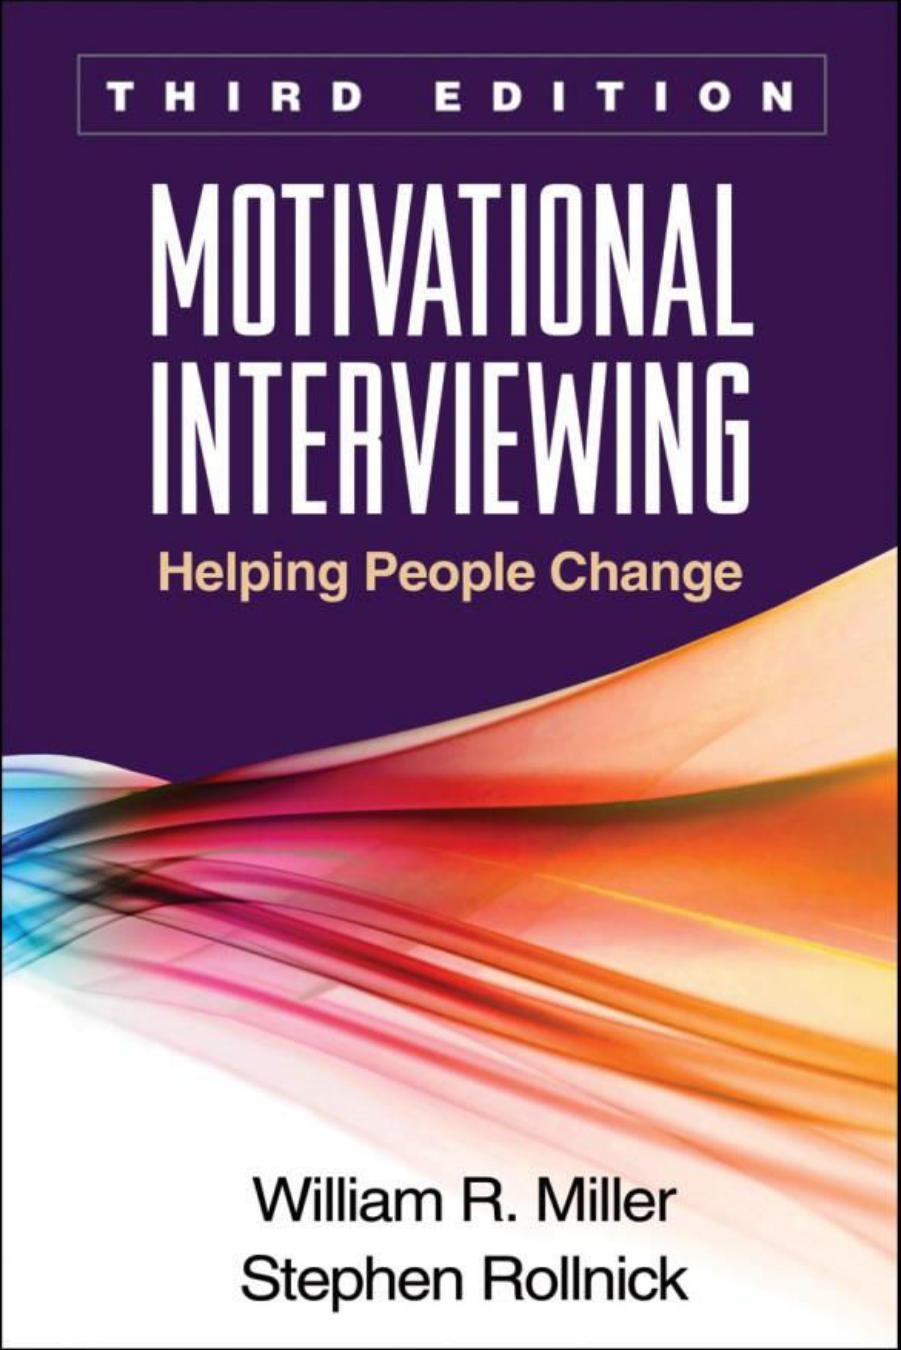 Motivational Interviewing, Third Edition: Helping People Change by William R. Miller Stephen Rollnick